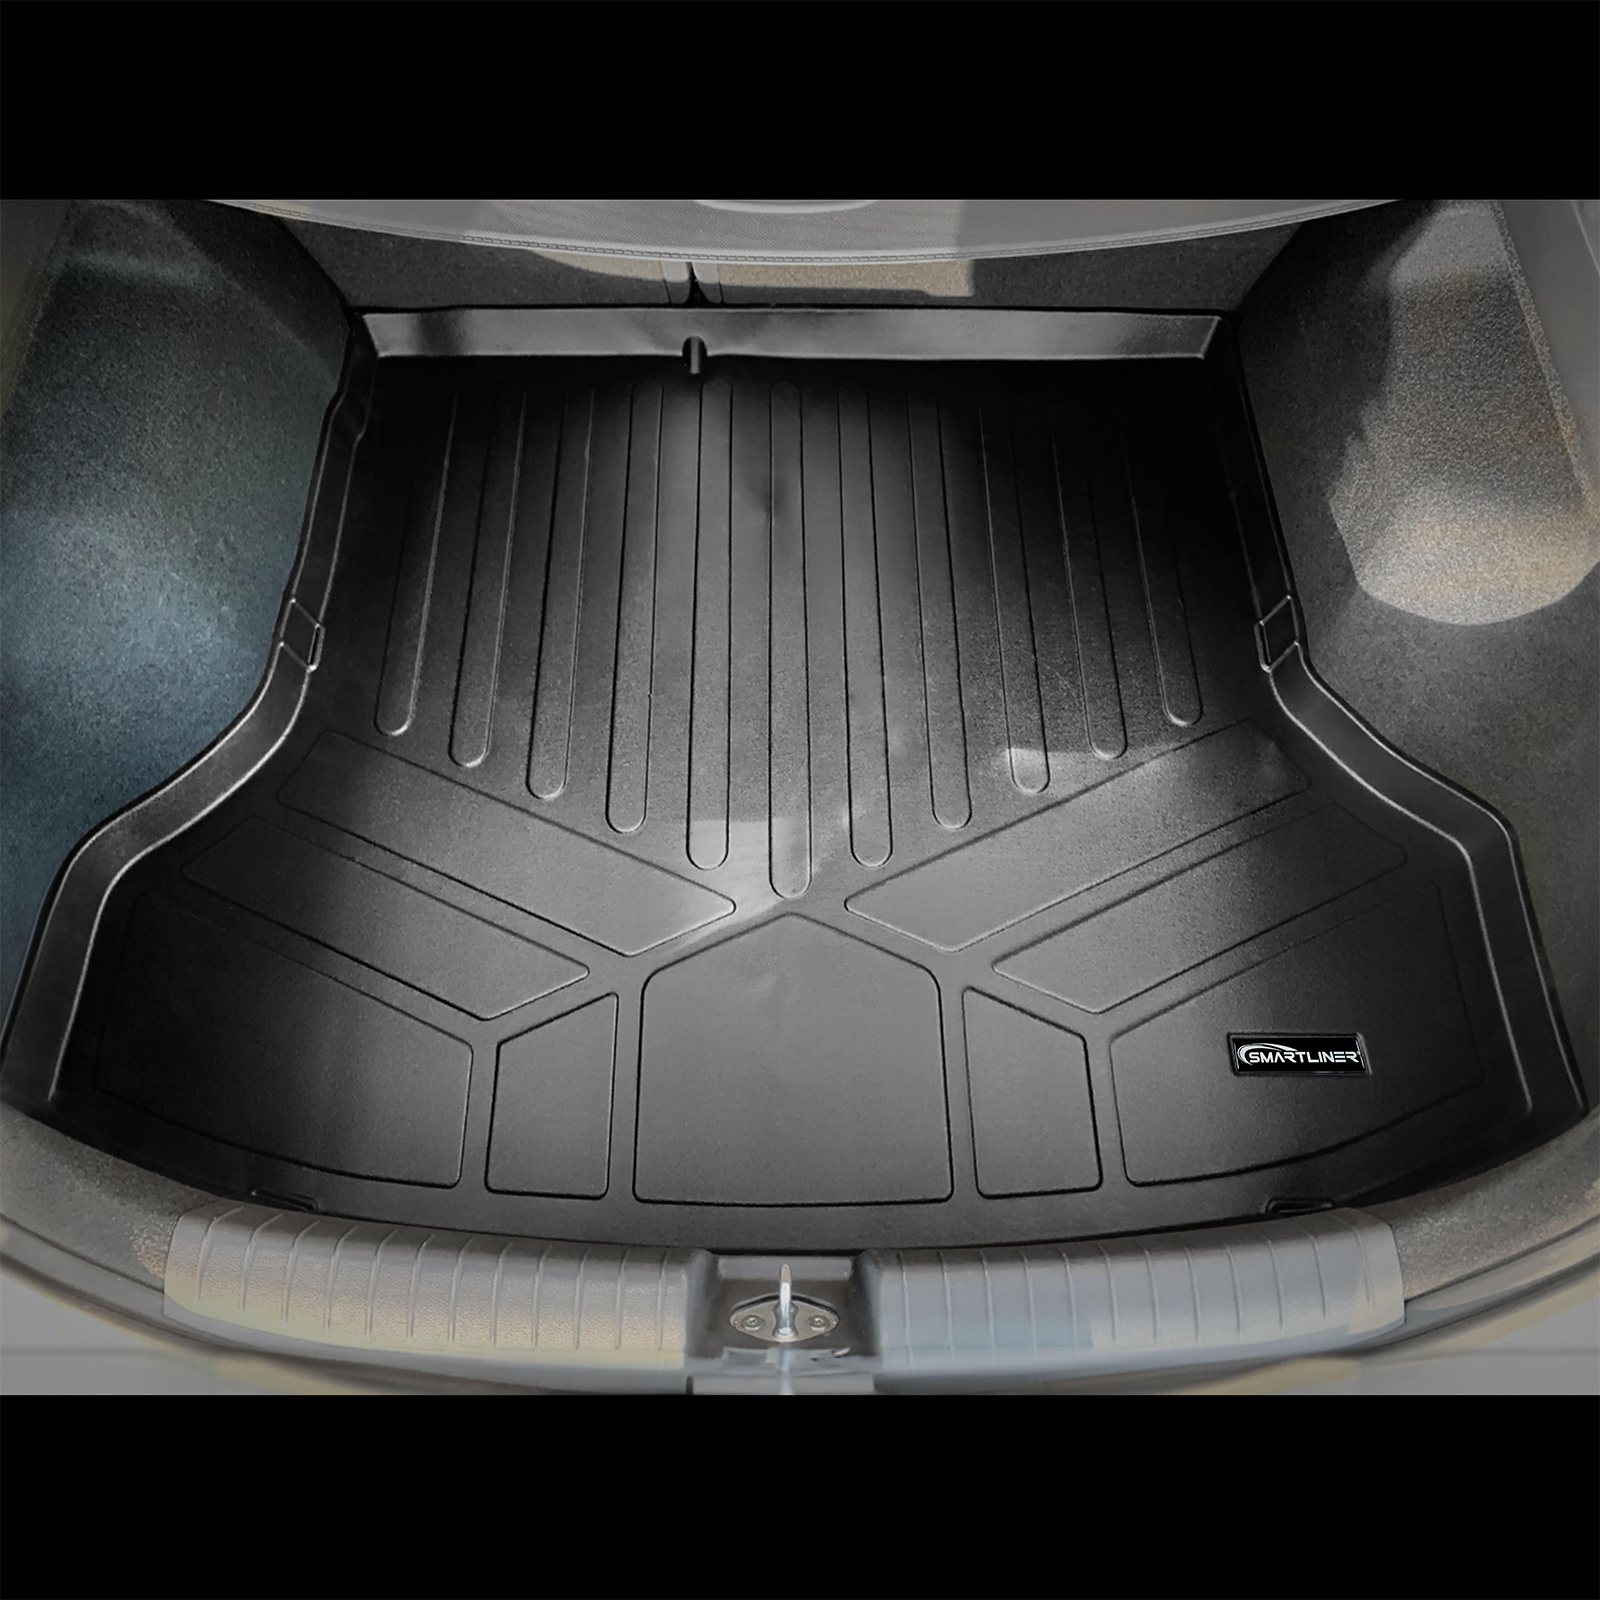 SMARTLINER Custom Fit Floor Liners For 2017-2022 Hyundai Ioniq Hybrid Blue Trim no Subwoofer in Cargo Area (Does Not Fit Electric Models)